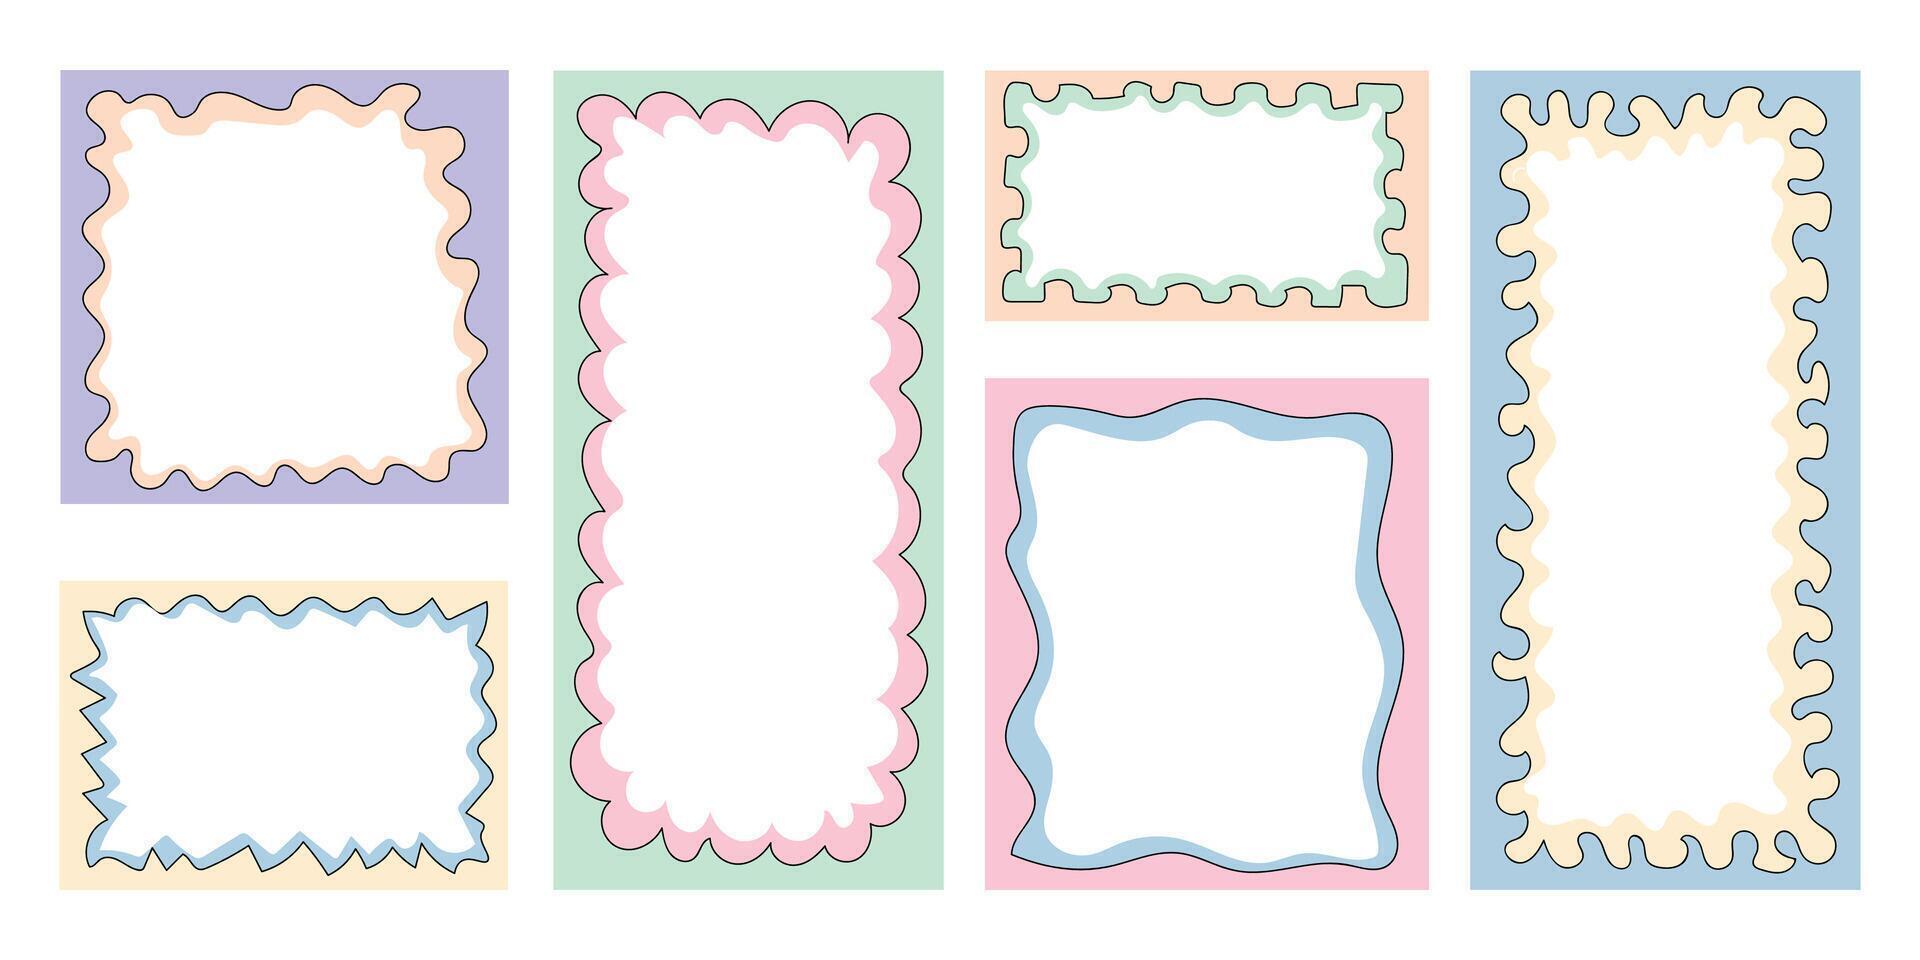 Colored frames in doodle style. Set of hand drawn paper quote frames for text . Colored shaped text box. illustration vector